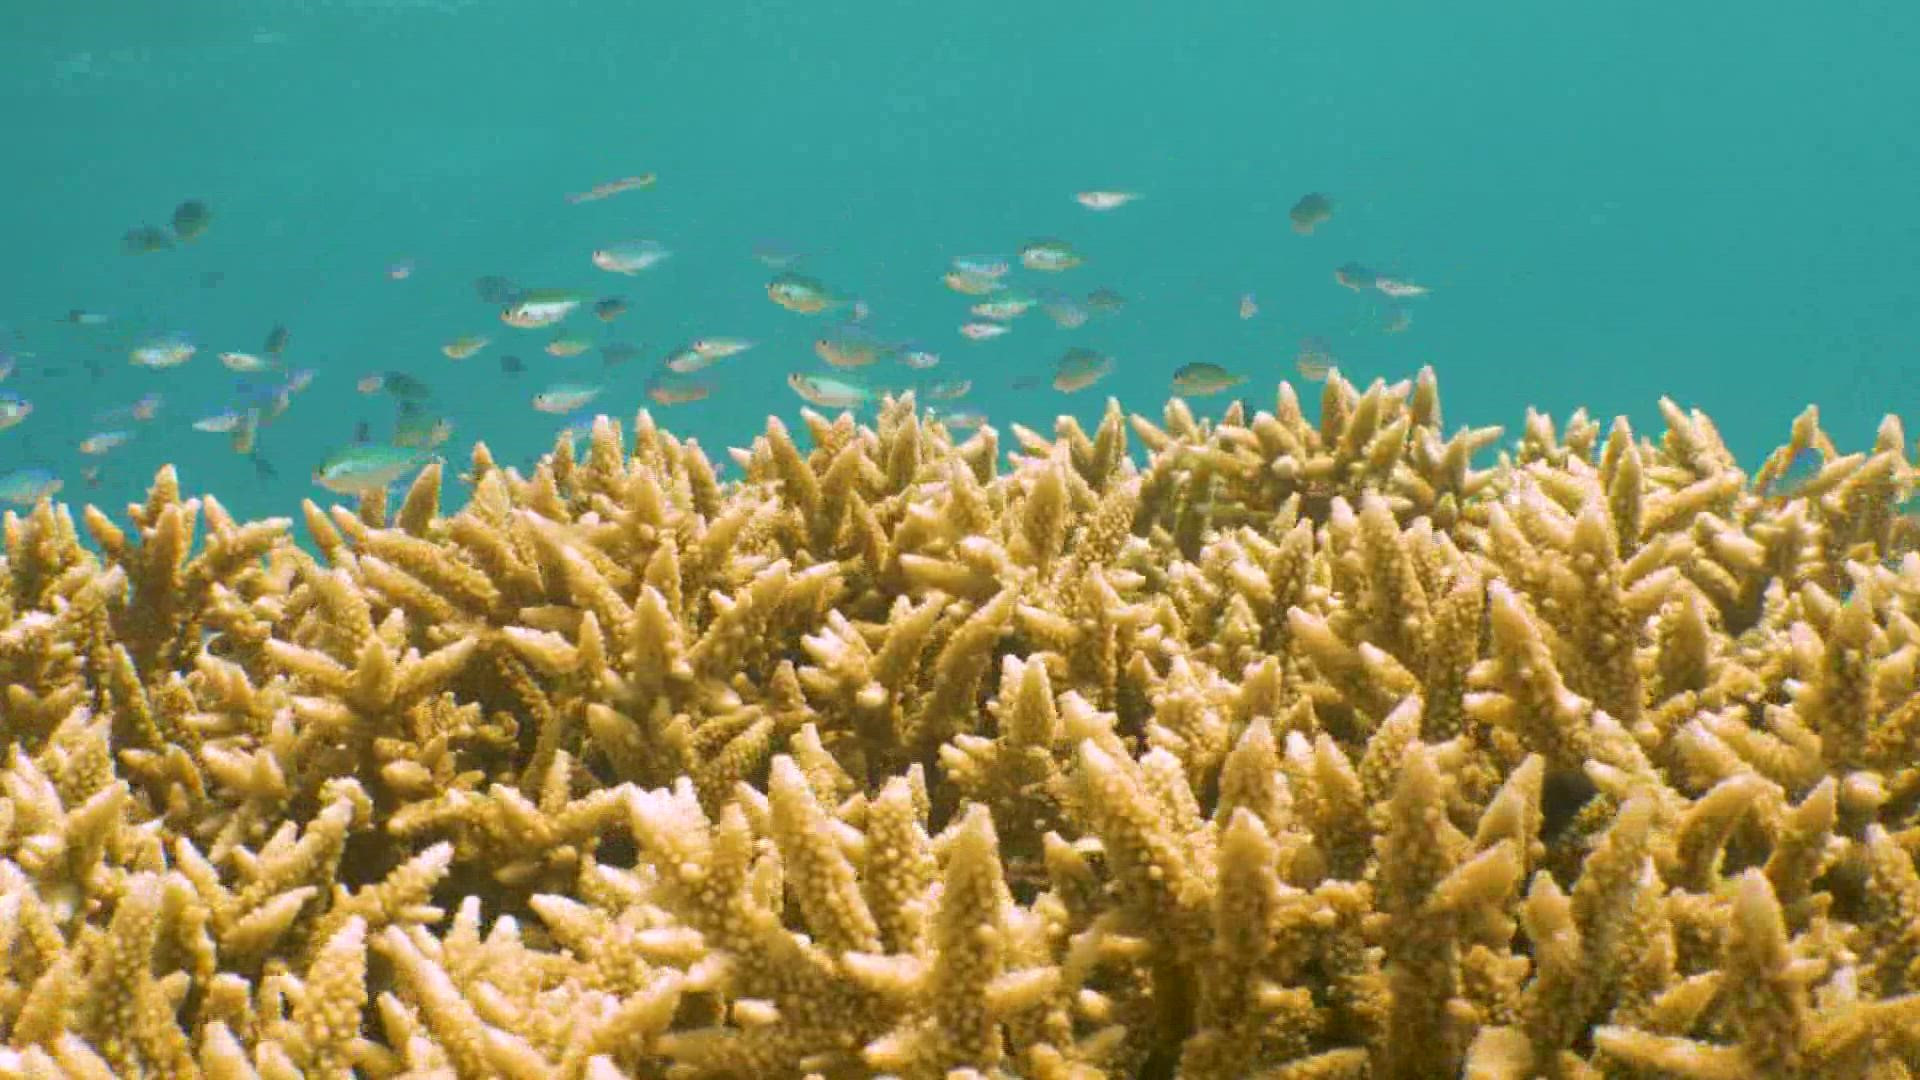 The Great Barrier Reef is in great danger that's according to a report backed by the United Nations.